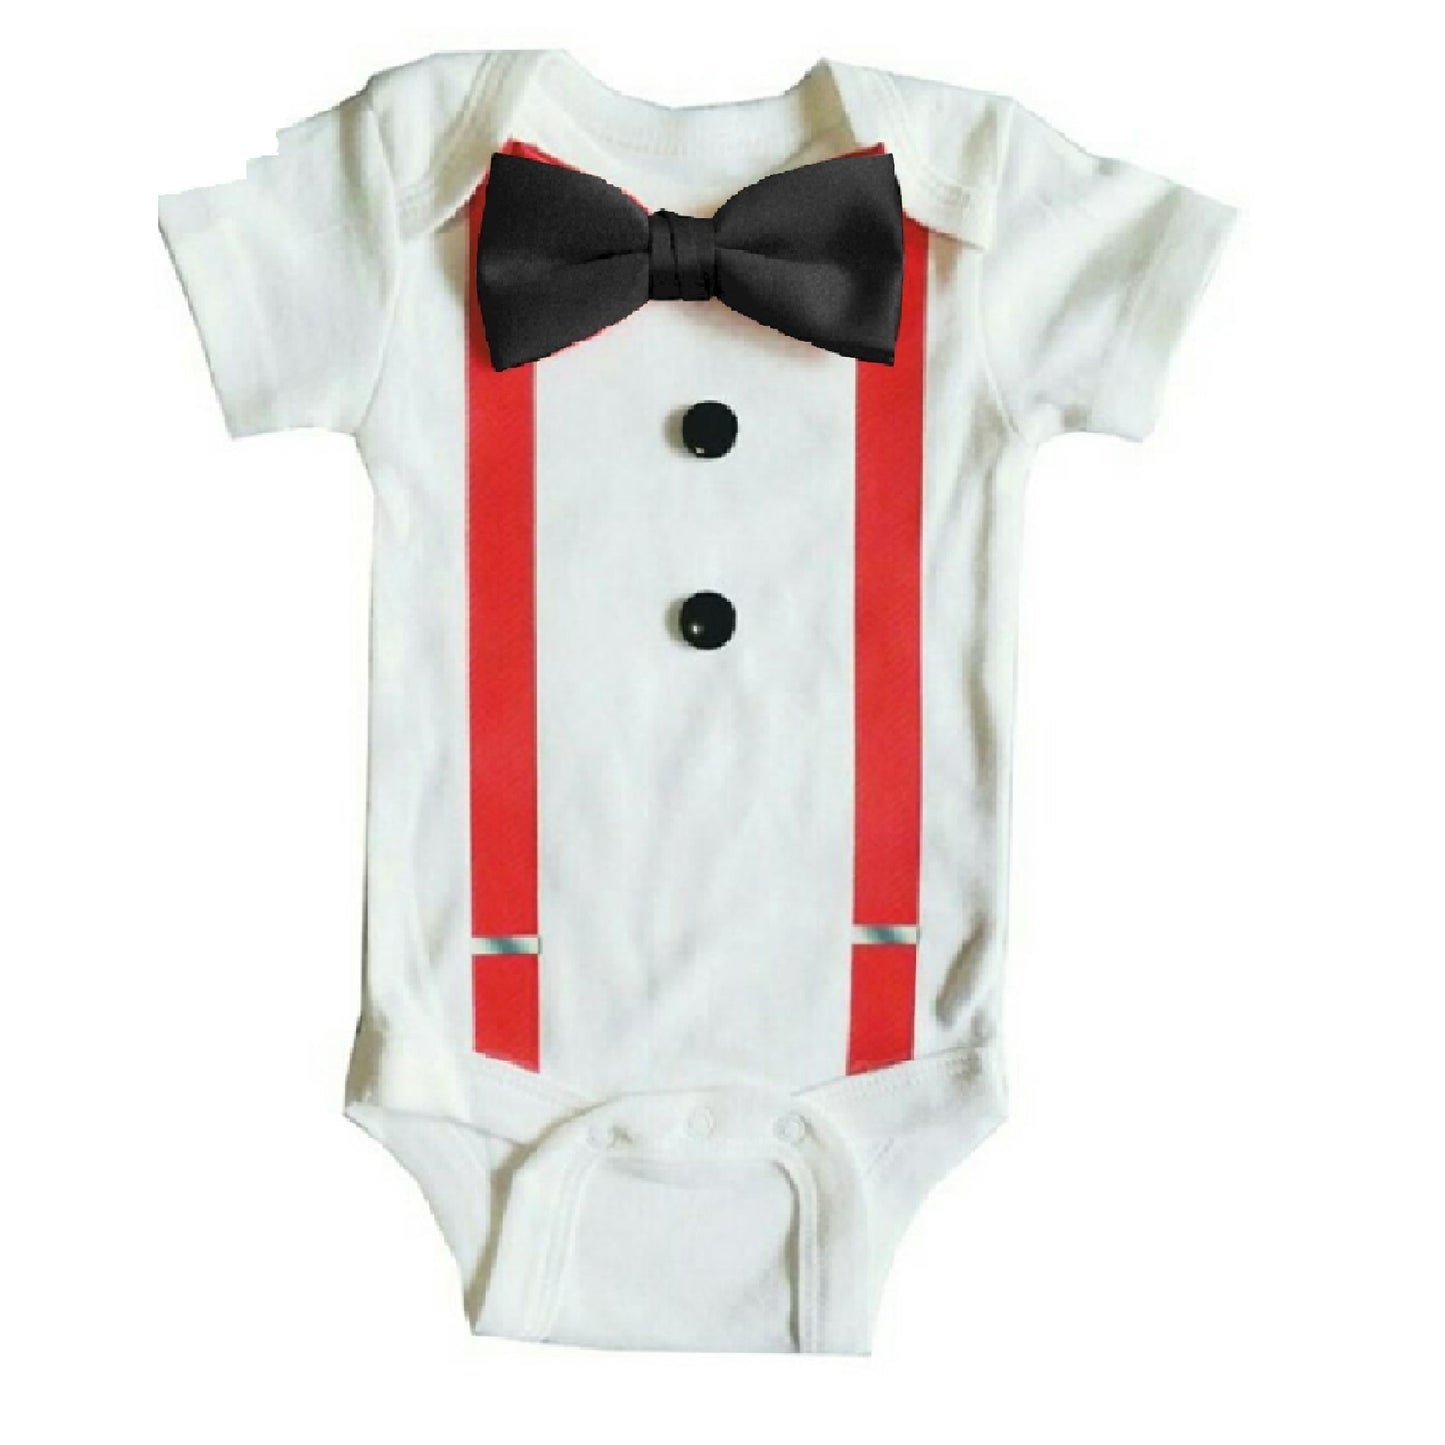 Baby Formal Tuxedo Suspender Onesies with Black or Red Bow Tie - MYSTYLEMYCLOTHING